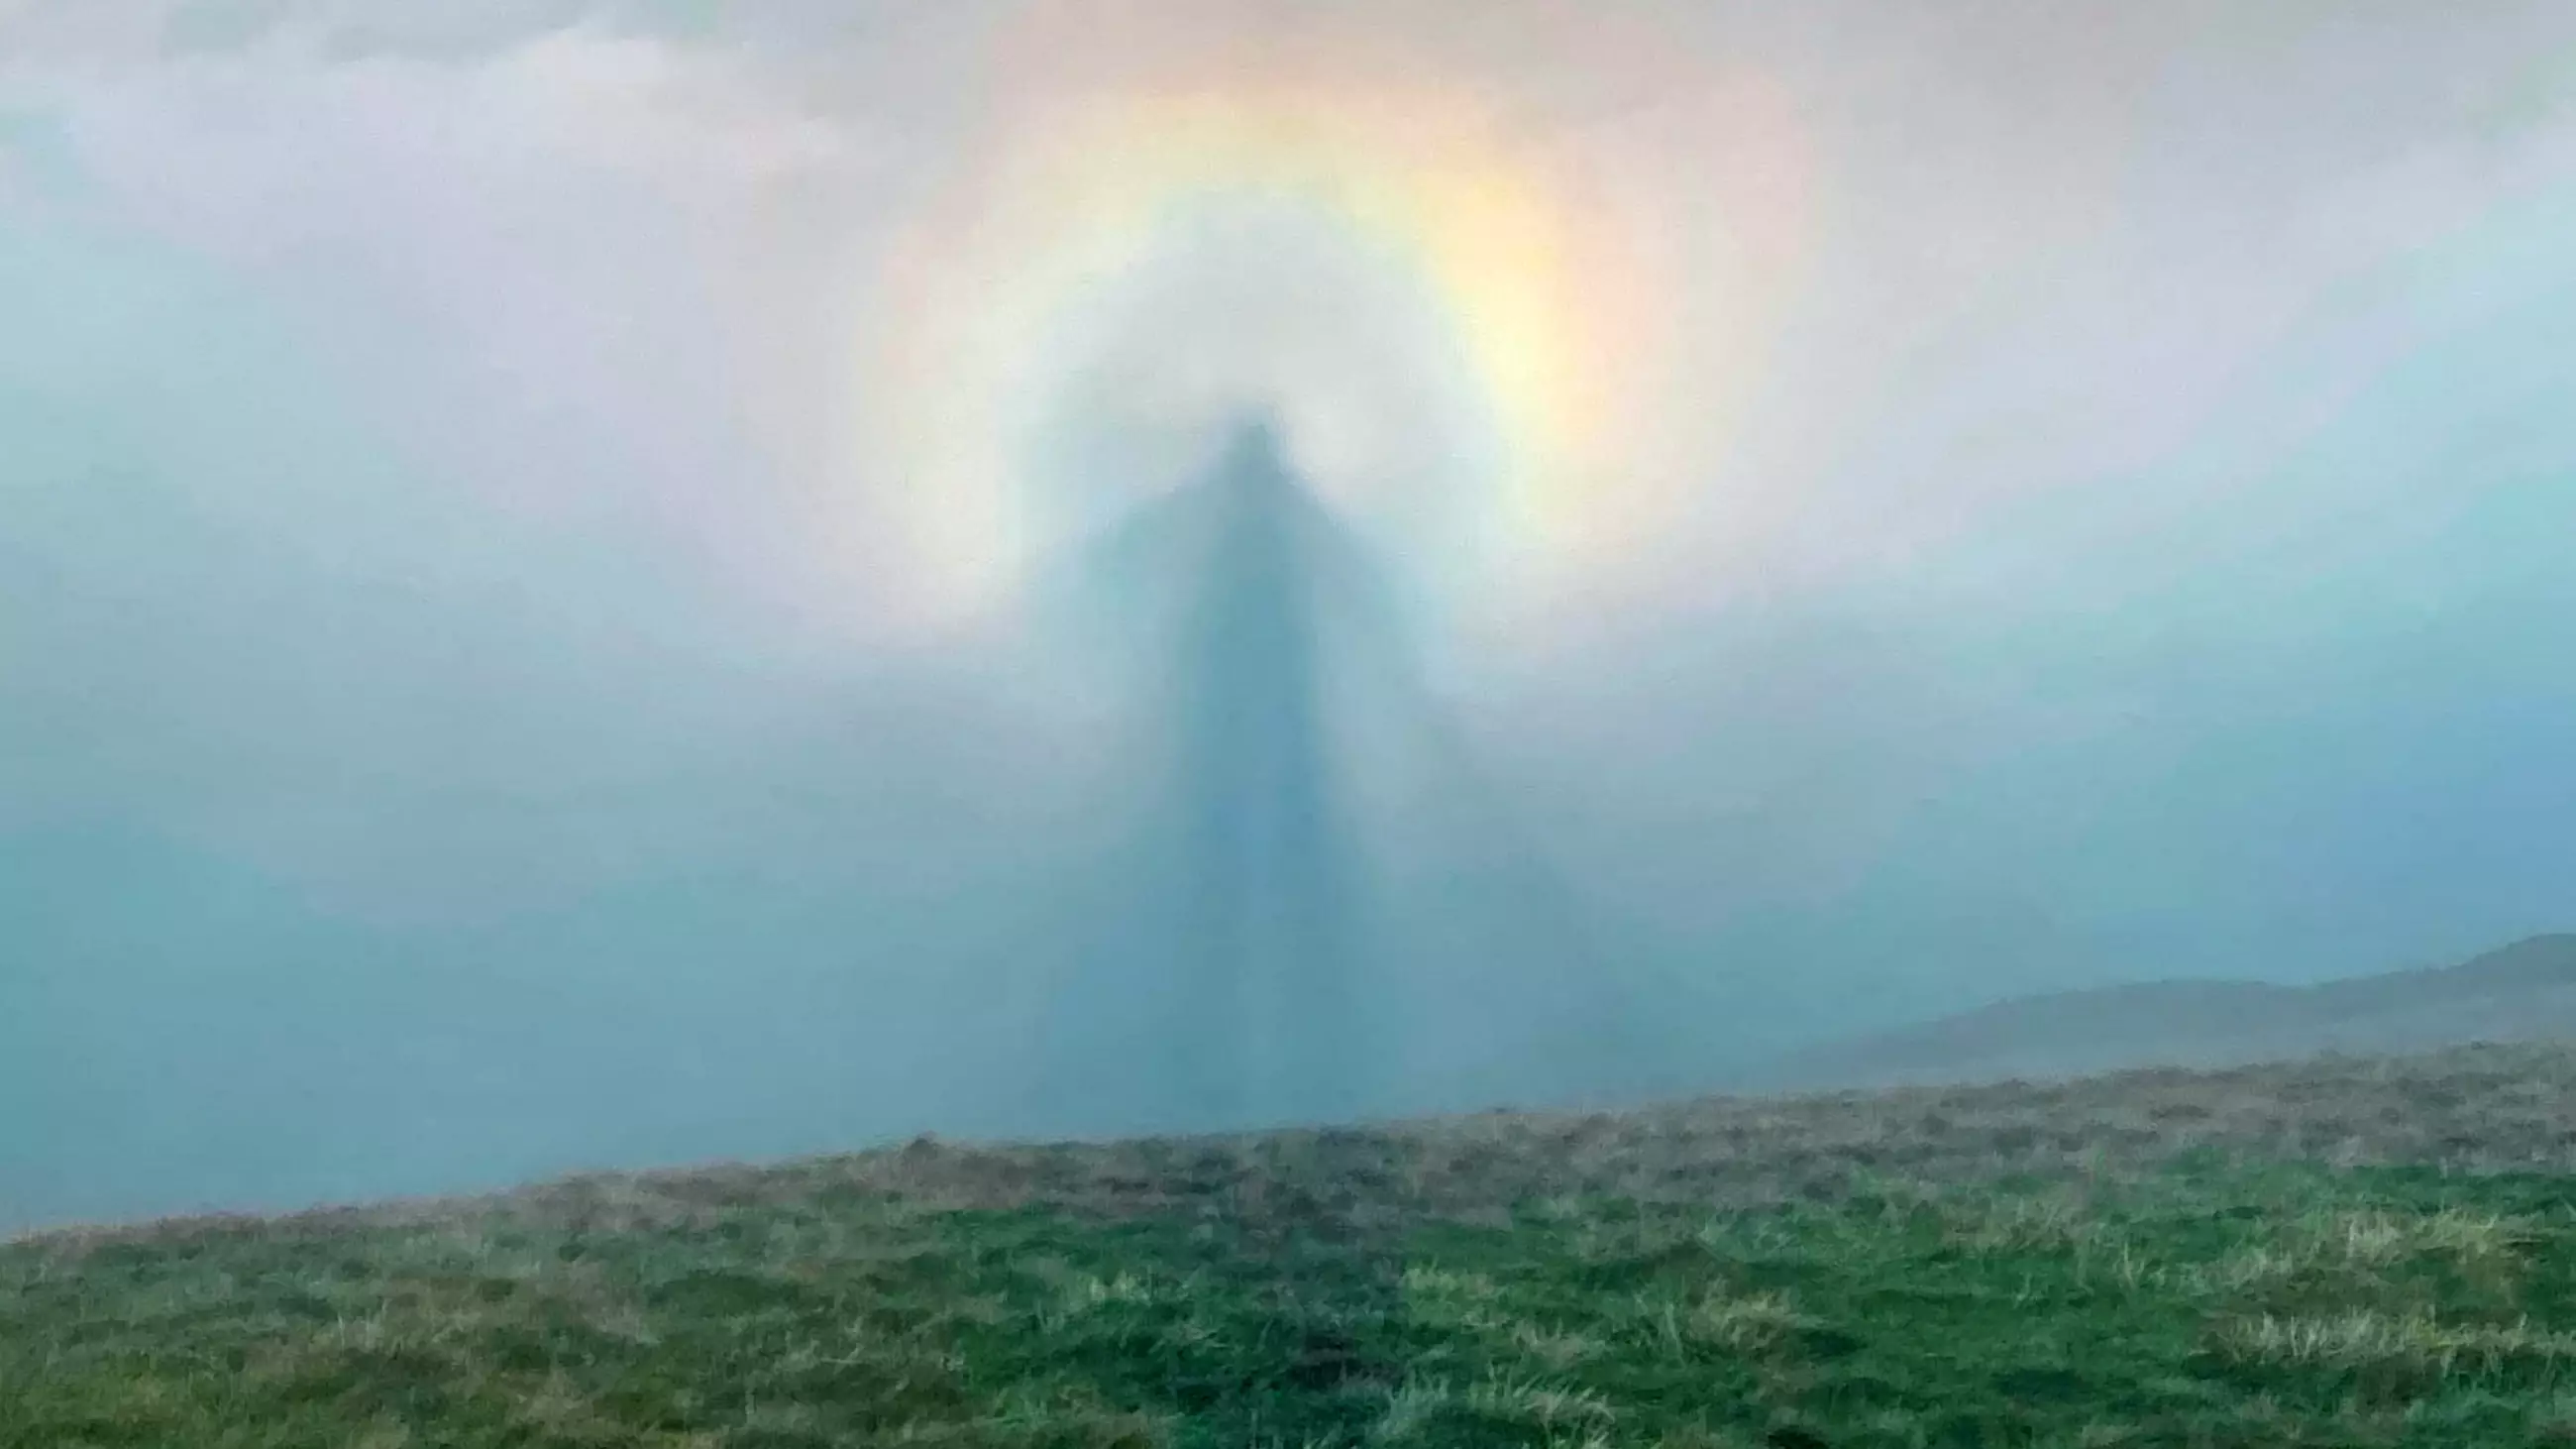 Hiker Captures Rare Phenomenon That Looks Like An Angel In The Clouds